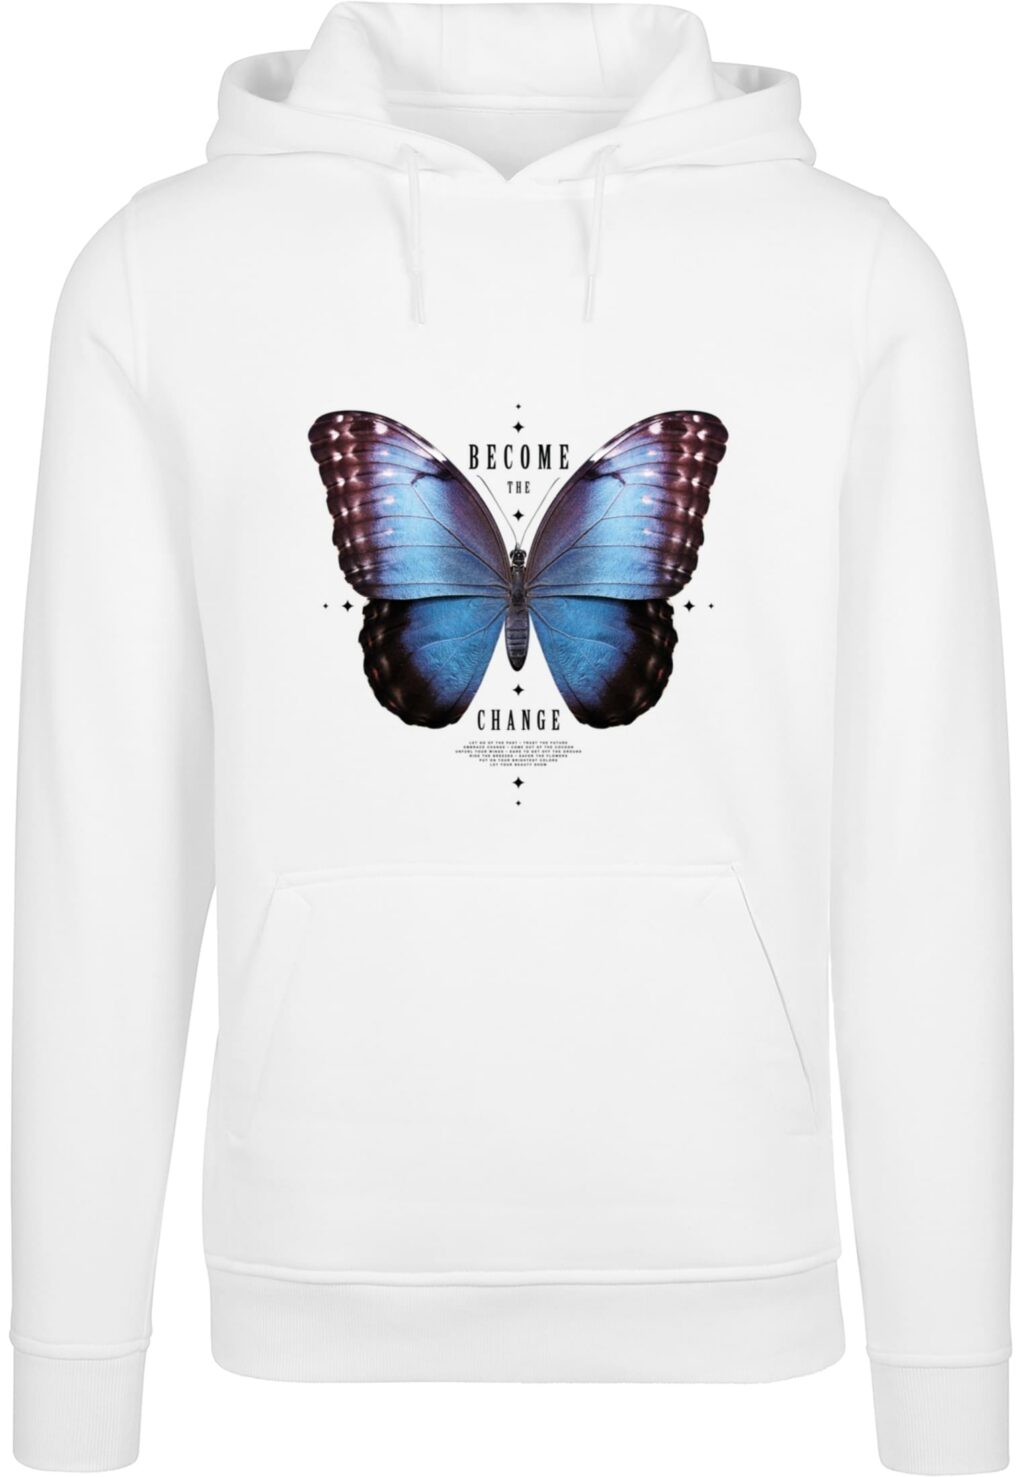 Become The Change Butterfly Hoody white MT3029